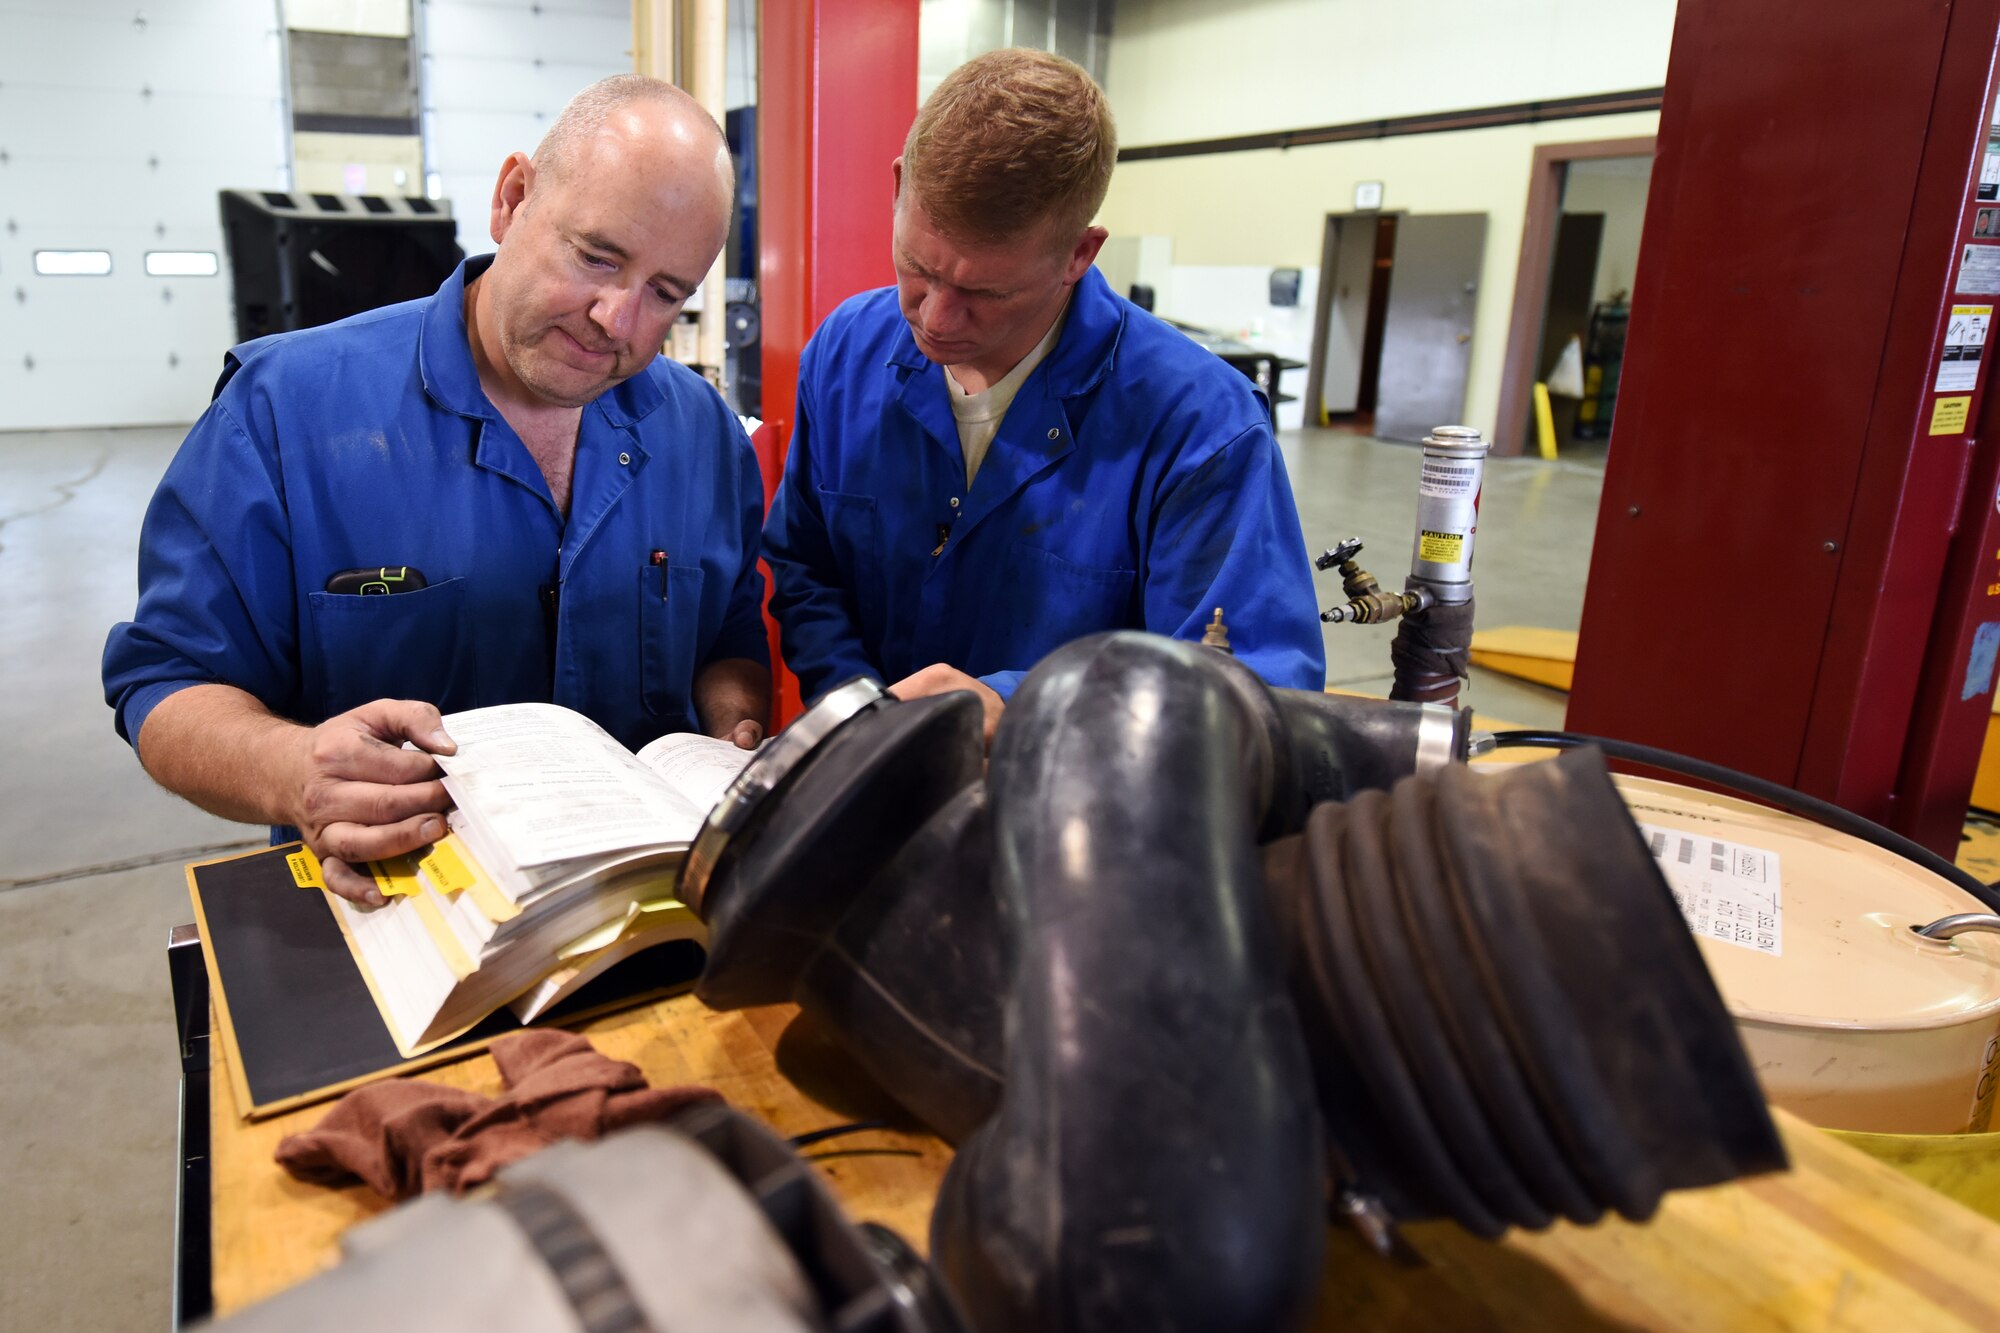 Bob Anderson and Senior Airman Jason Brown, 341st Logistics Readiness Squadron truck and tractor shop vehicle mechanics, review a technical order for procedures to remove injectors on a maintenance van engine July 27, 2015, at Malmstrom Air Force Base, Mont. The 341st LRS truck and tractor maintenance shop maintains all semi trucks and trailers on base. (U.S. Air Force photo/Chris Willis)